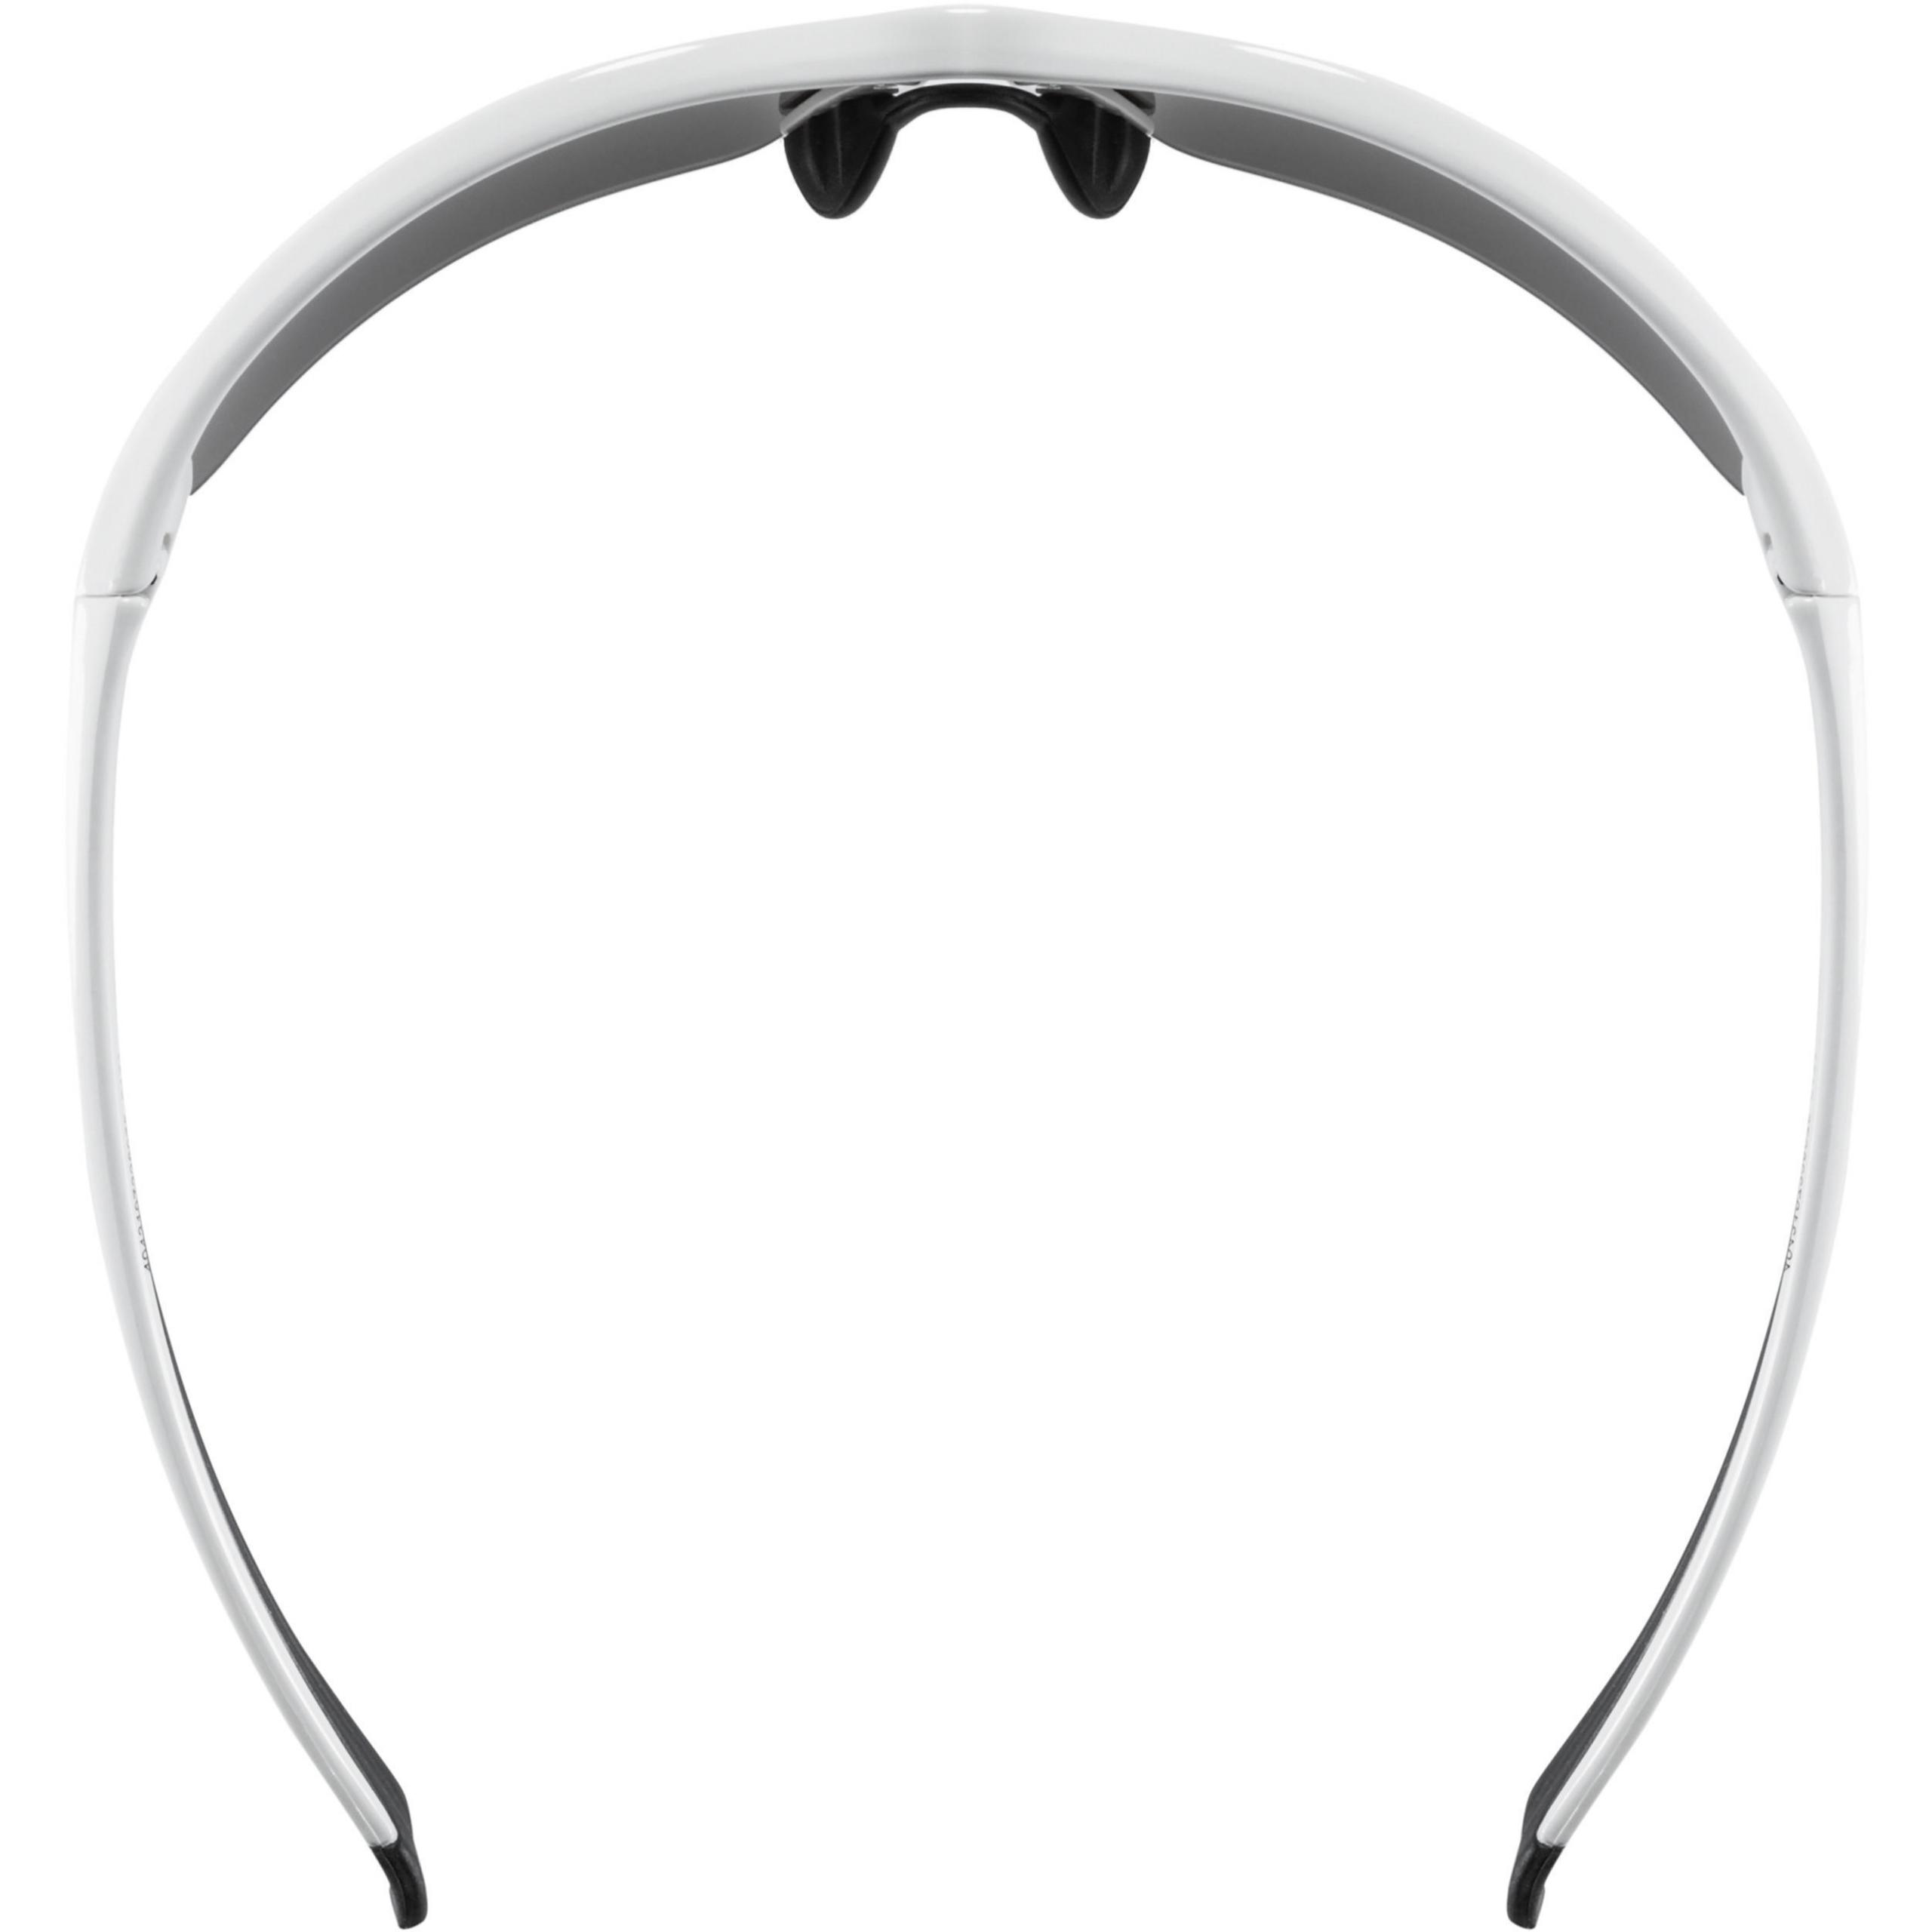 Uvex Sportstyle 215 Lunettes Blanc//Rouge